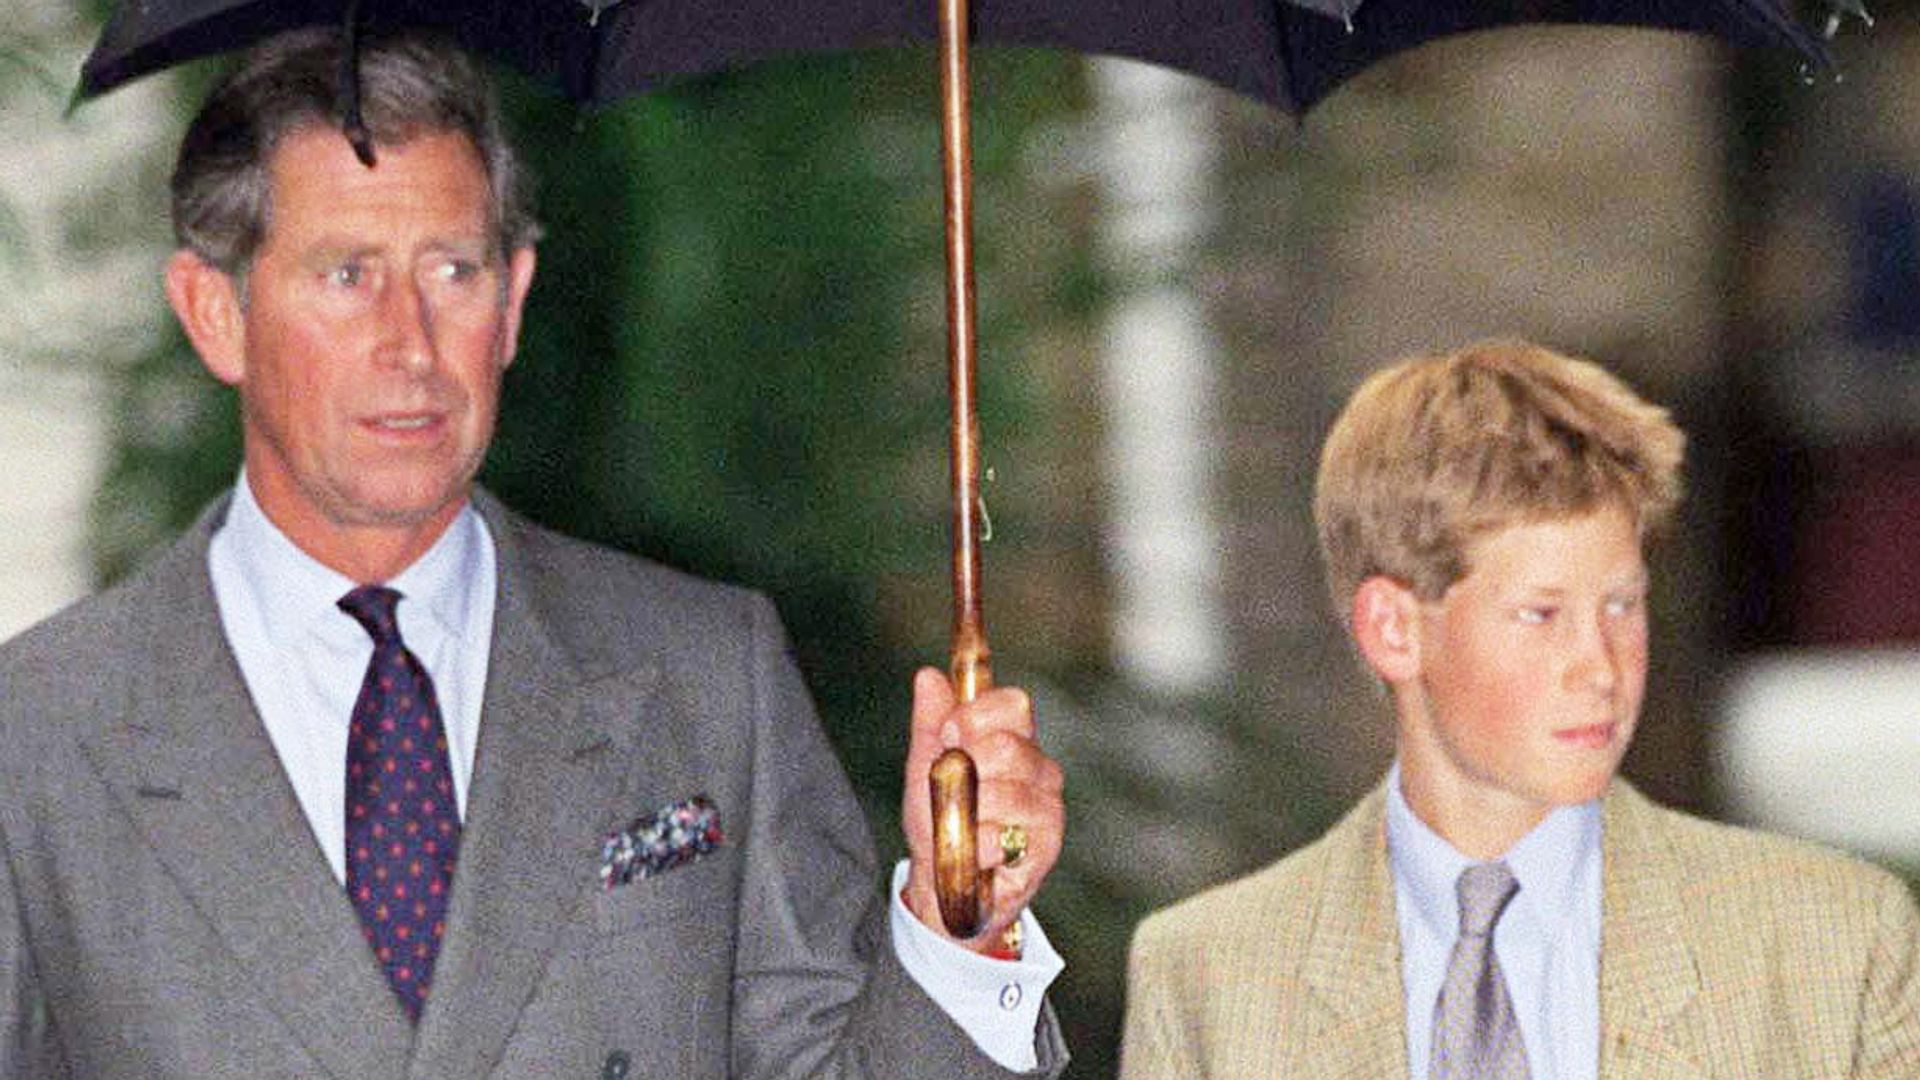 Prince Harry under an umbrella at Eton College with King Charles